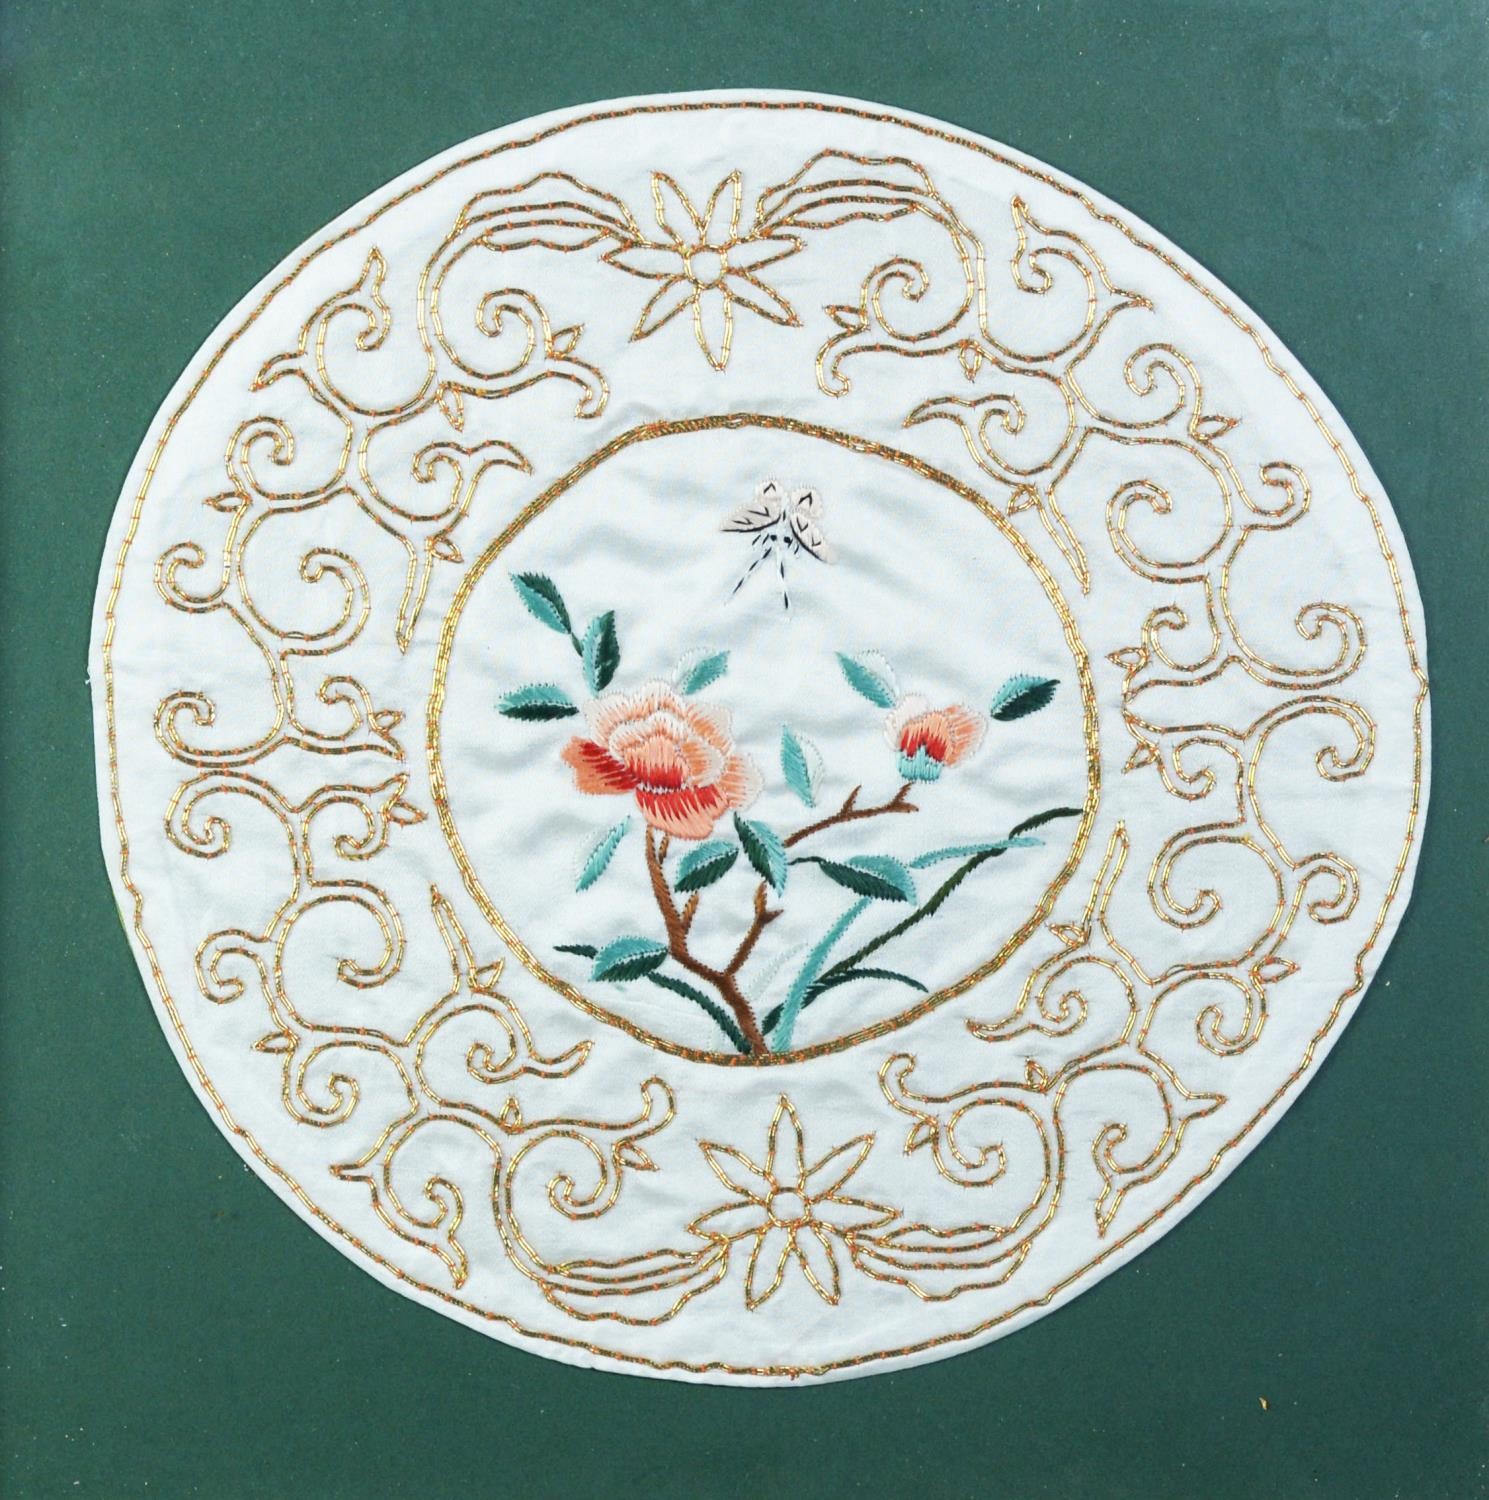 SIX CHINESE SILK NEEDLEWORK CIRCULAR PANELS, centred with flowers within a gilt foliate scroll - Image 4 of 4